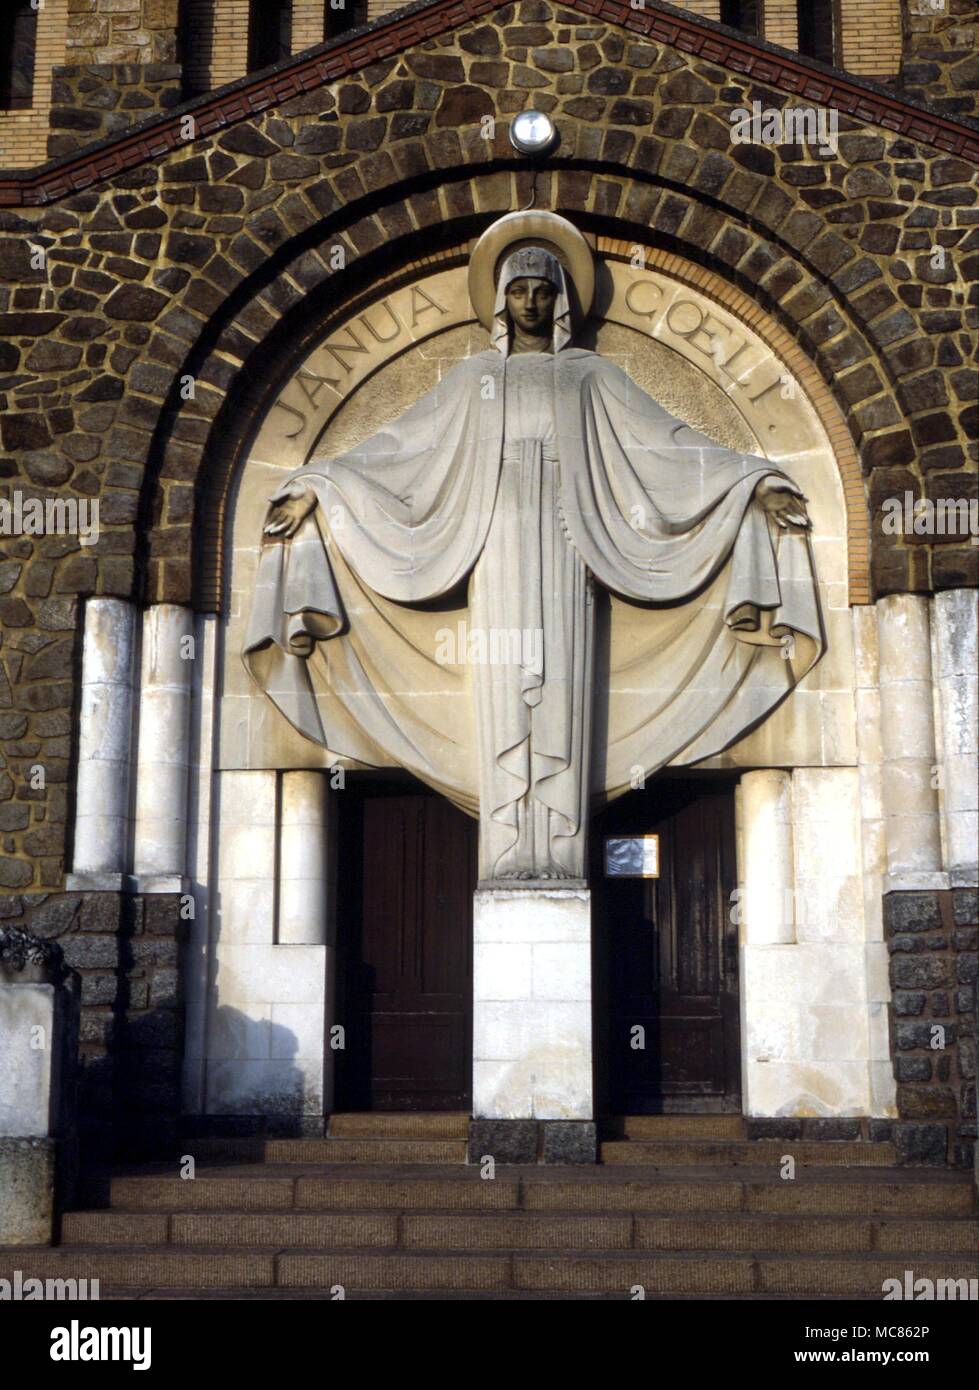 CHRISTIAN SYMBOLS The image of the Virgin Mary over the entrance to the catholic church at Cholet, France Stock Photo